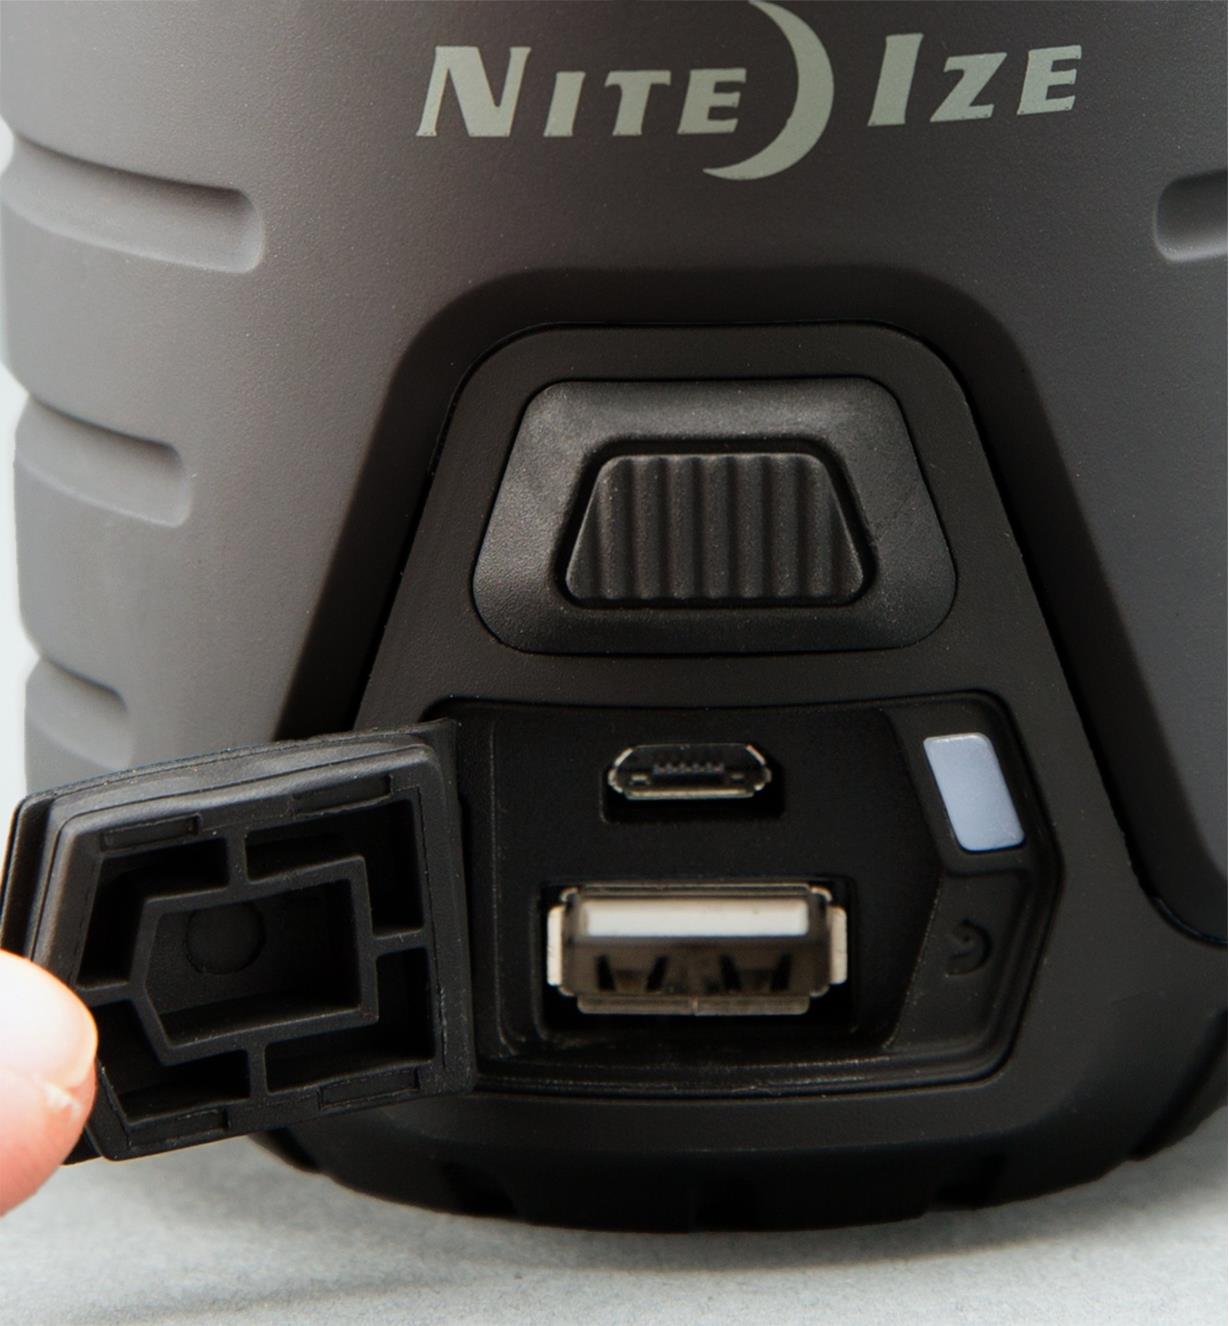 A panel on the base of the lantern is open to show a USB port and micro input for charging